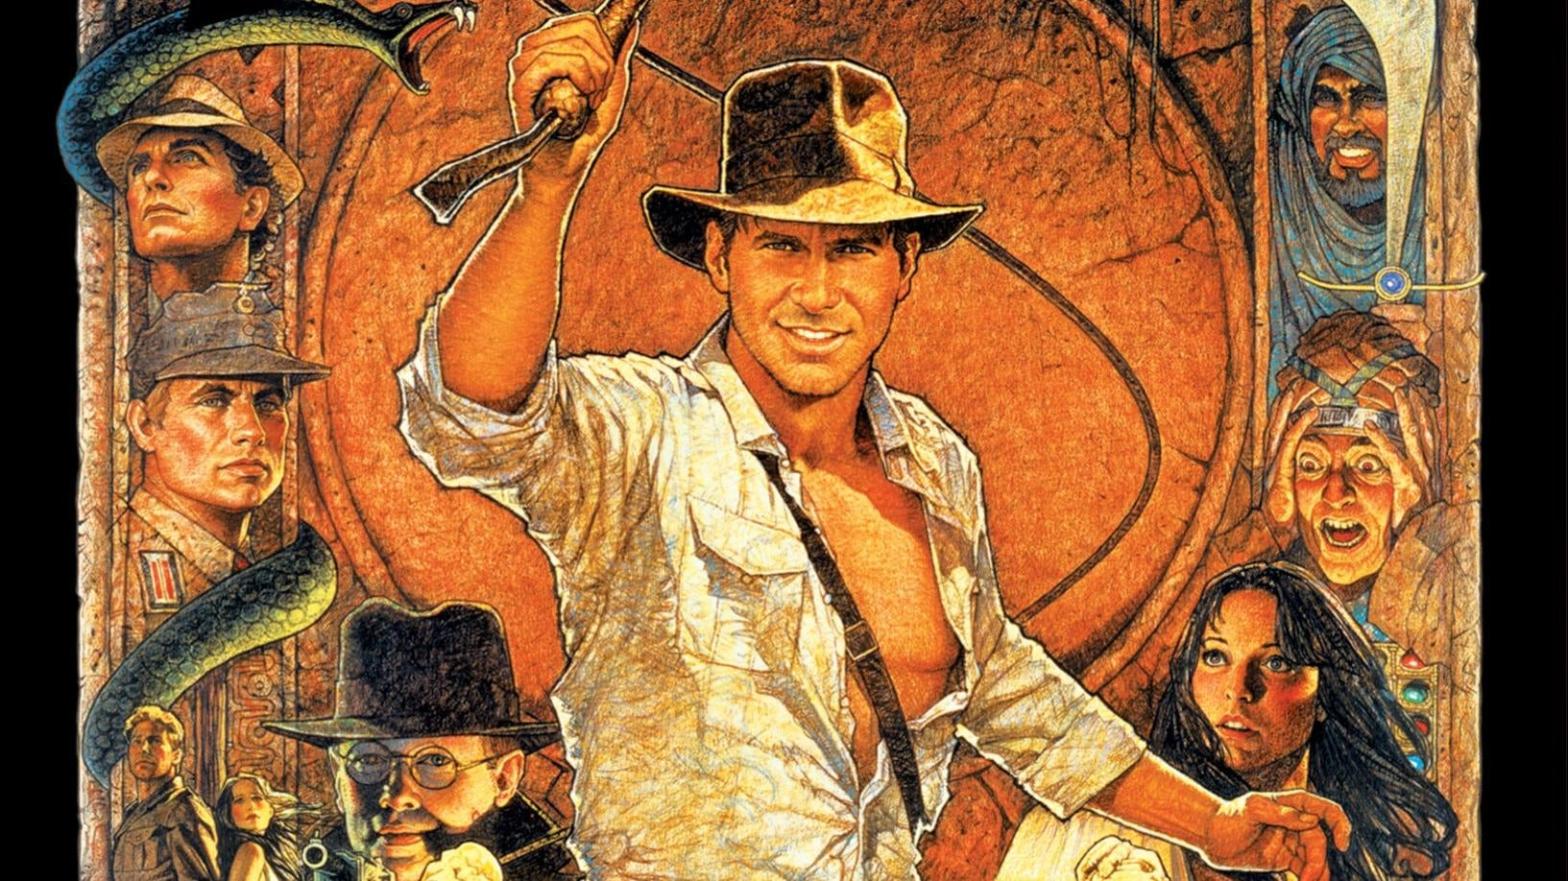 A crop of the poster for Raiders of the Lost Ark. (Image: Lucasfilm)